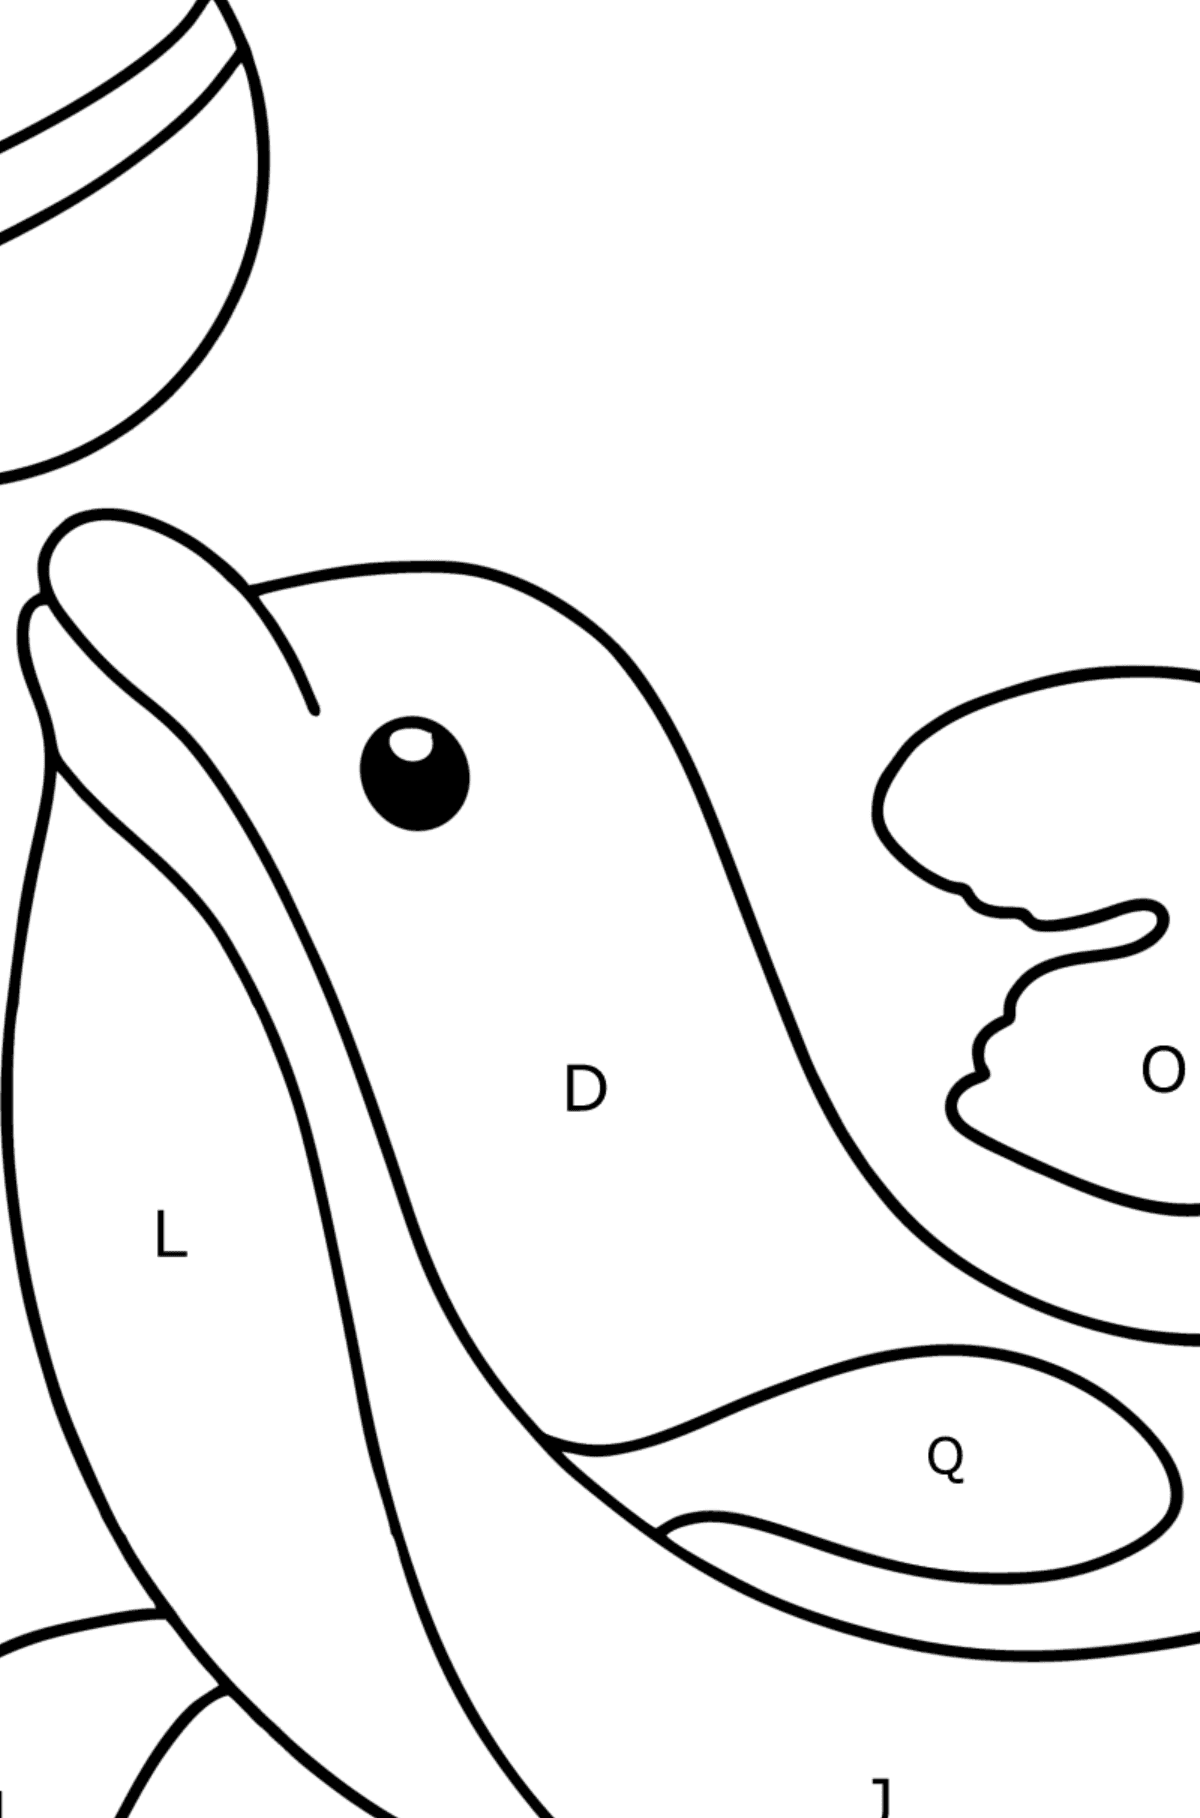 Dolphin is Performing coloring page - Coloring by Letters for Kids